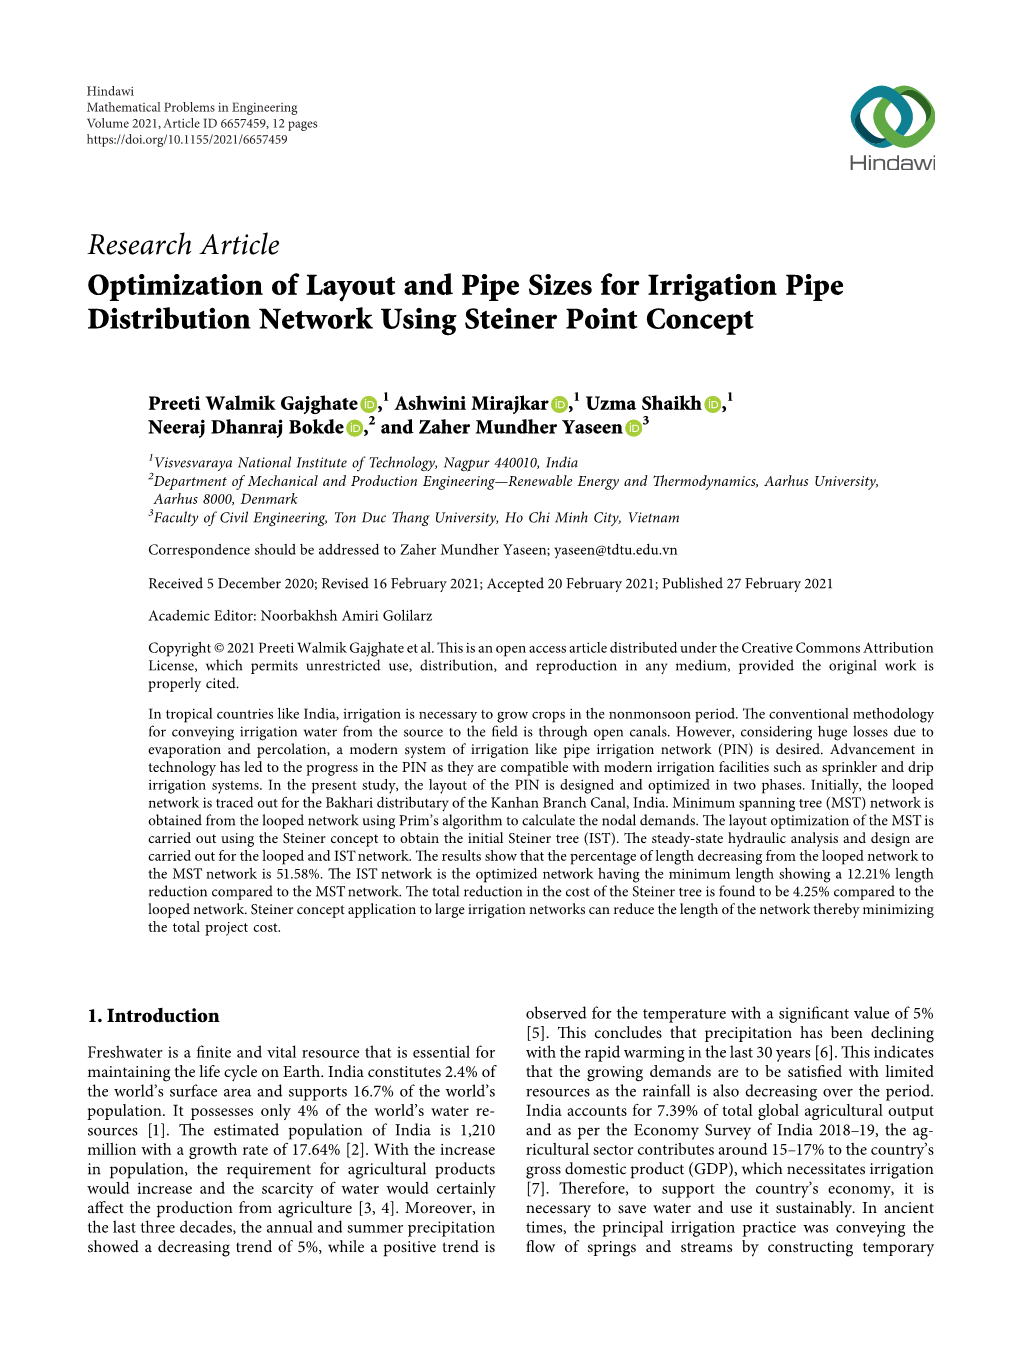 Optimization of Layout and Pipe Sizes for Irrigation Pipe Distribution Network Using Steiner Point Concept